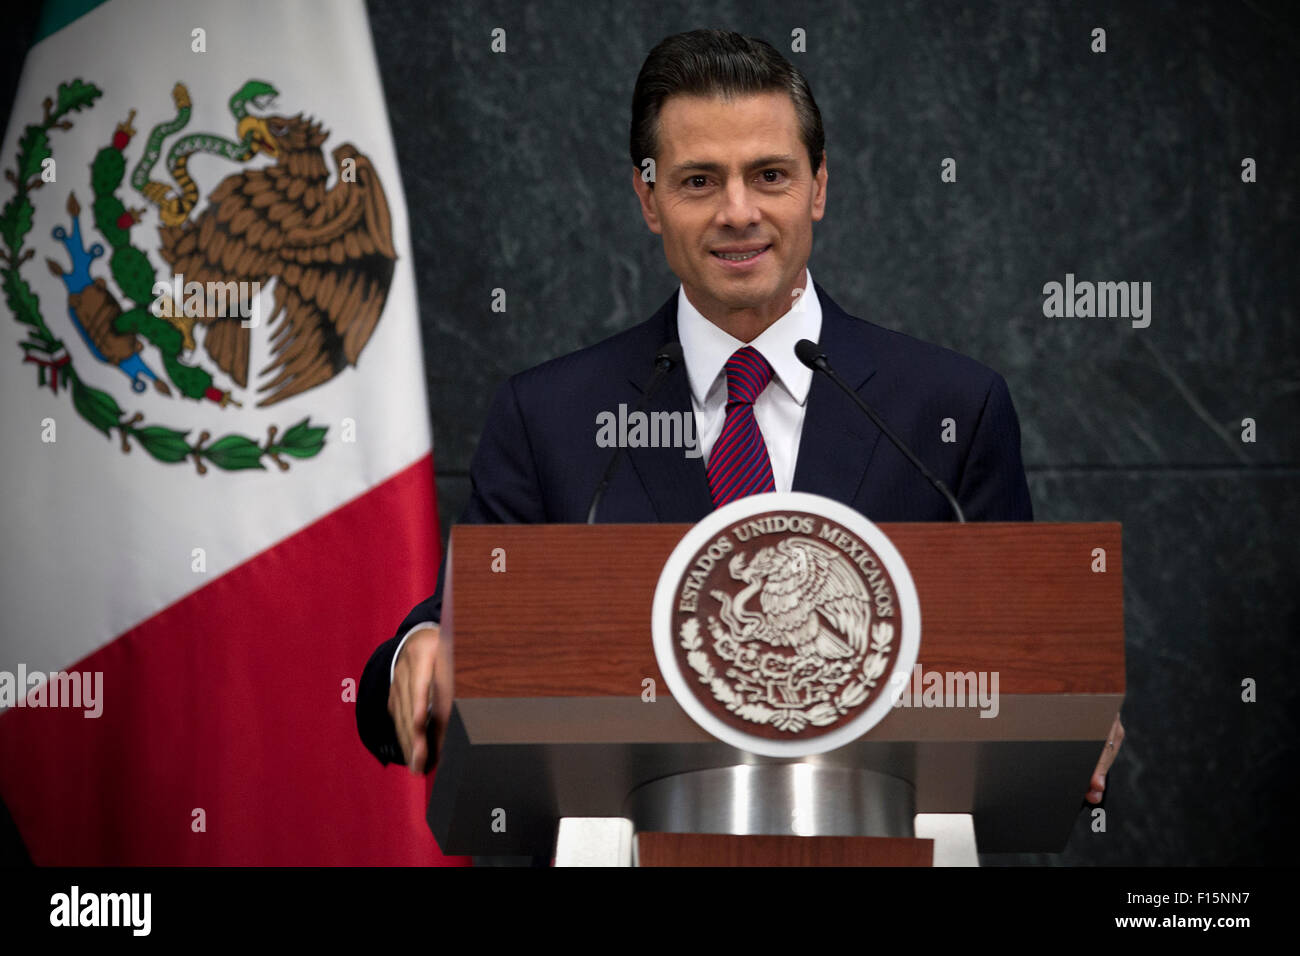 Mexico City, Mexico. 27th Aug, 2015. Mexico's President Enrique Pena Nieto speaks during a press conference to announce cabinet reshuffle at the official residence of Los Pinos, in Mexico City, capital of Mexico, on Aug. 27, 2015. According to local press, Mexican President Enrique Pena Nieto announced Thursday ten changes within the State Secretariats and federal agencies. © Alejandro Ayala/Xinhua/Alamy Live News Stock Photo